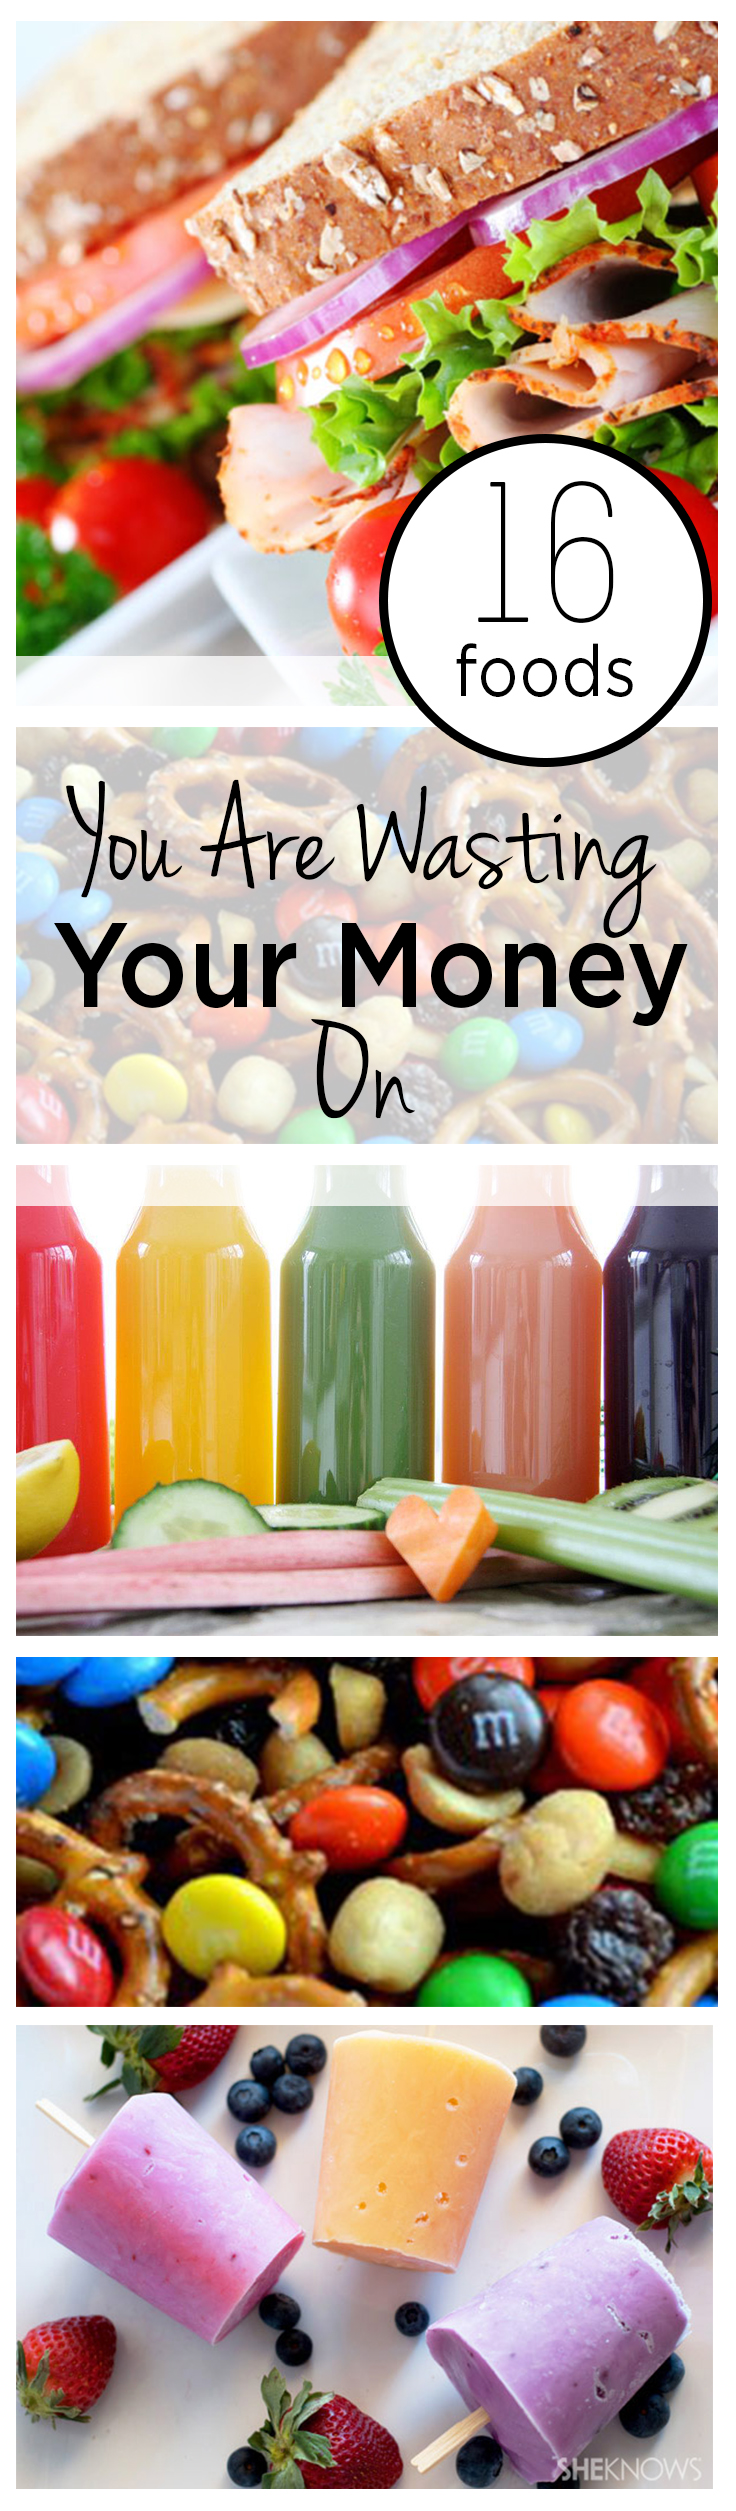 16 Foods You Are Wasting Your Money On (1)